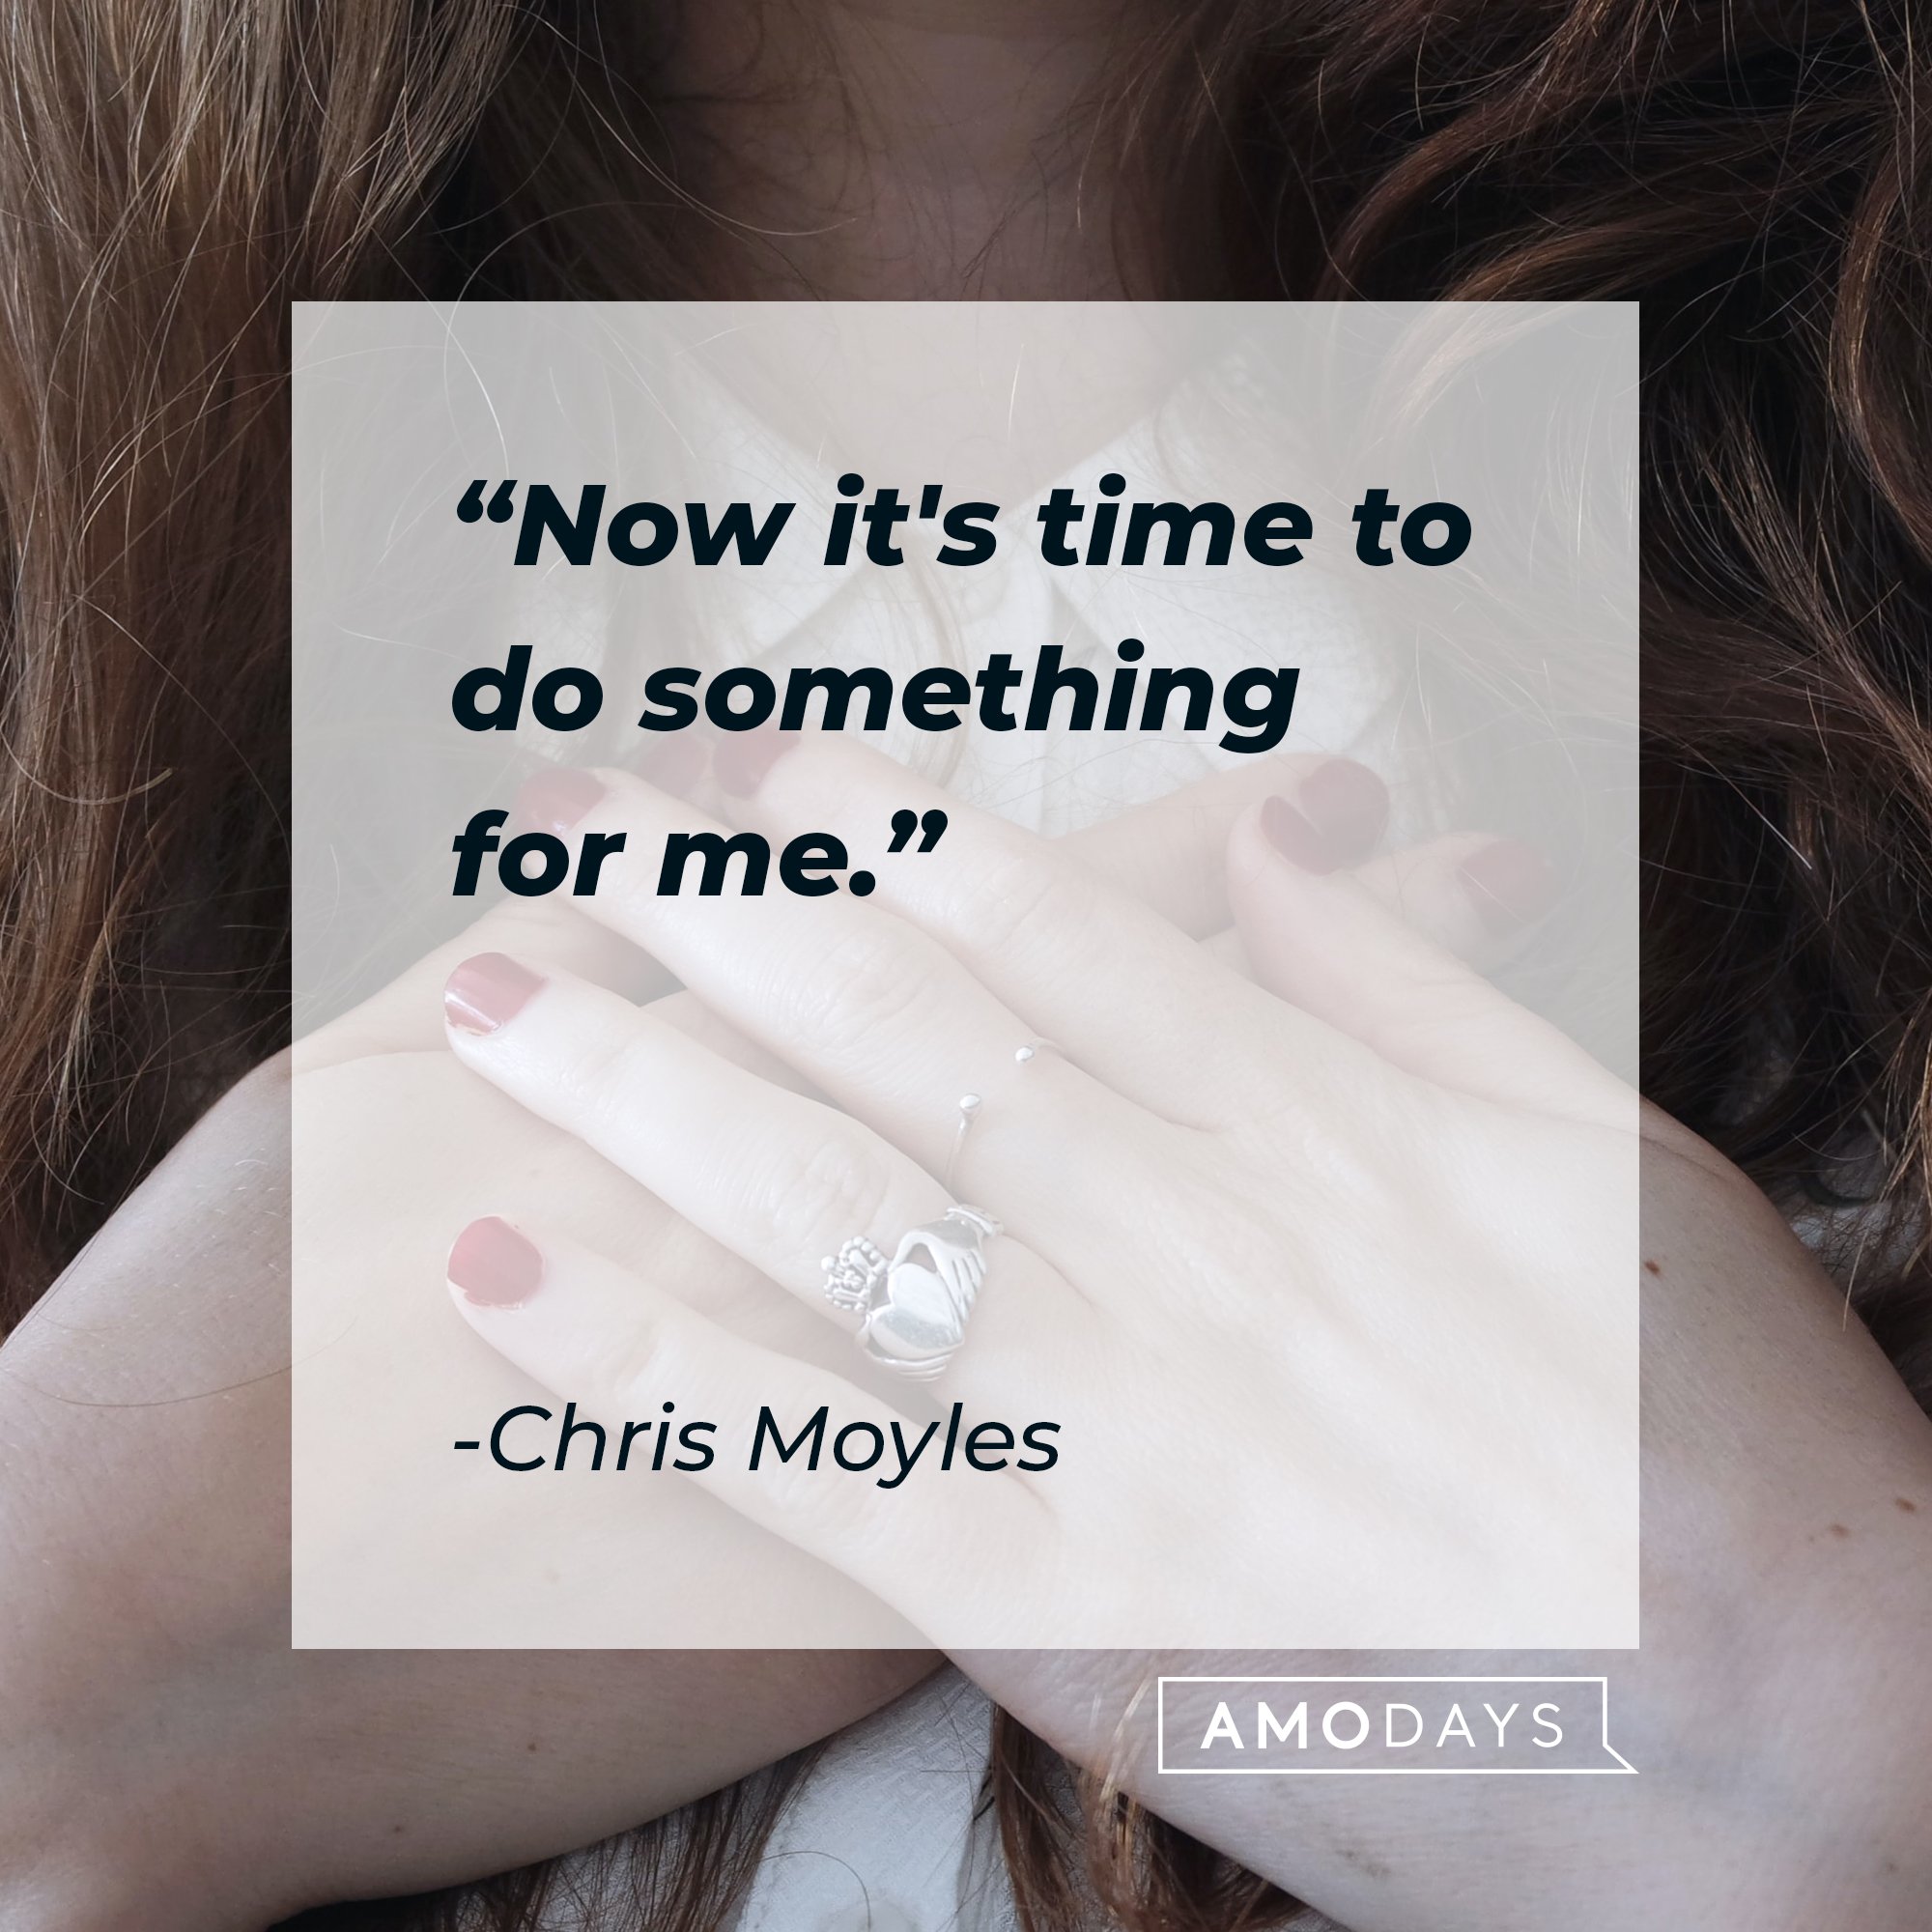 Chris Moyles’ quote: "Now it's time to do something for me." | Image: AmoDays 